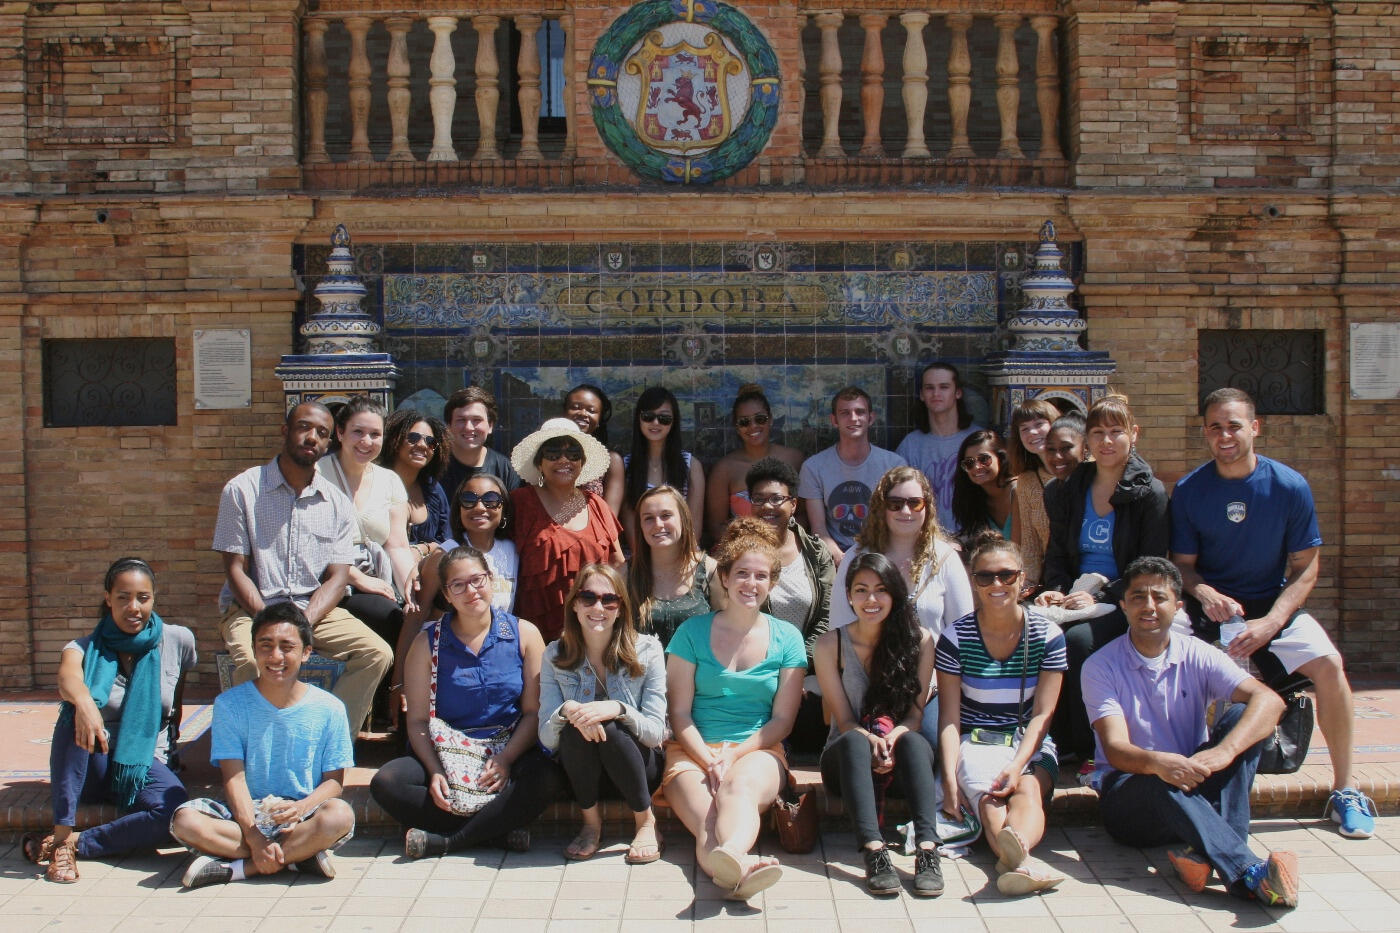 Anita Nadal (pictured in hat) with VCU students in Cordoba, Spain